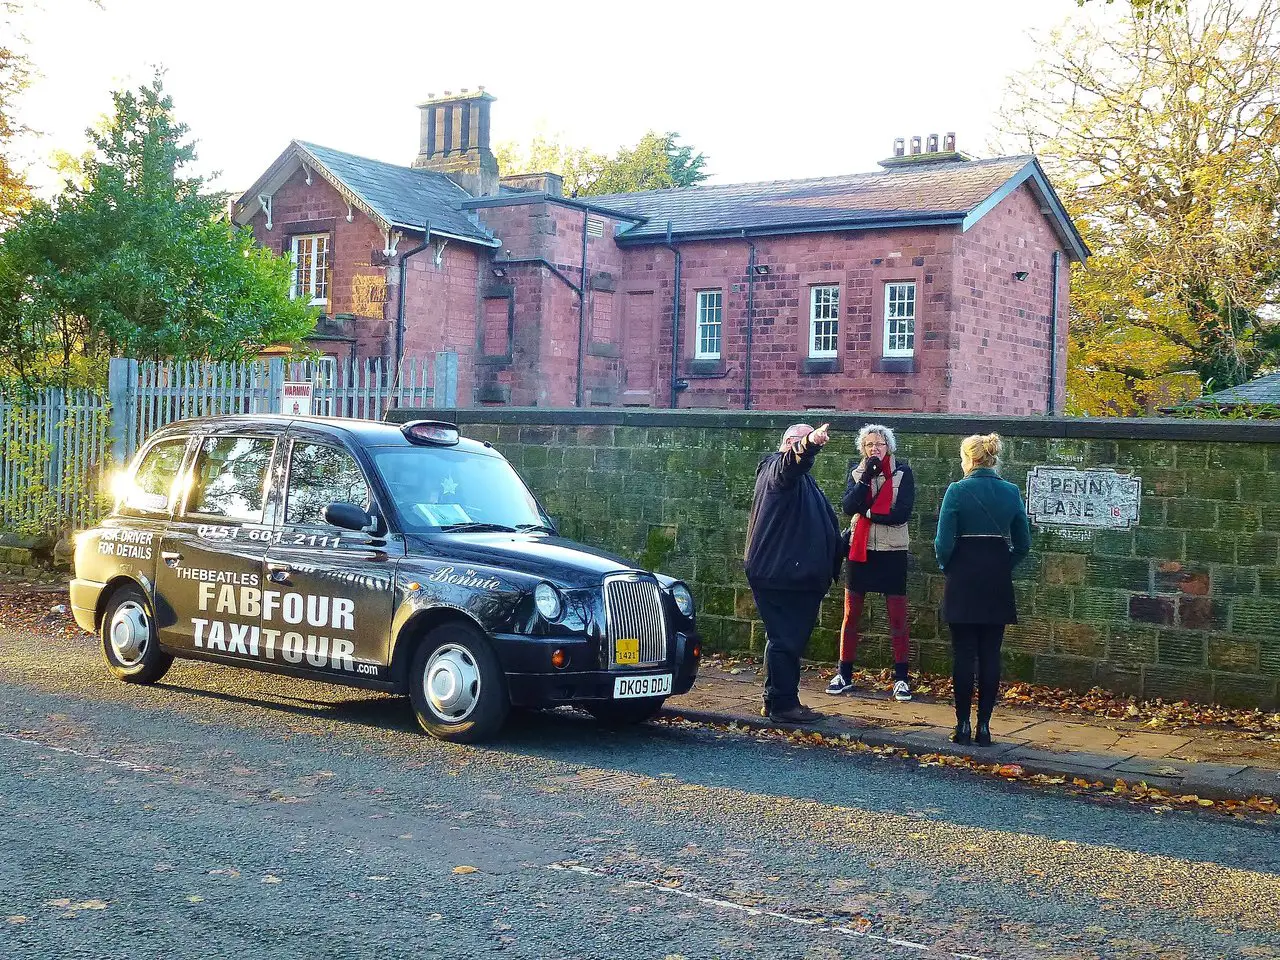 Liverpool Fab Four Taxi Tours - a black cab parked on Penny Lane as a guide points out the sights to two female tourists.